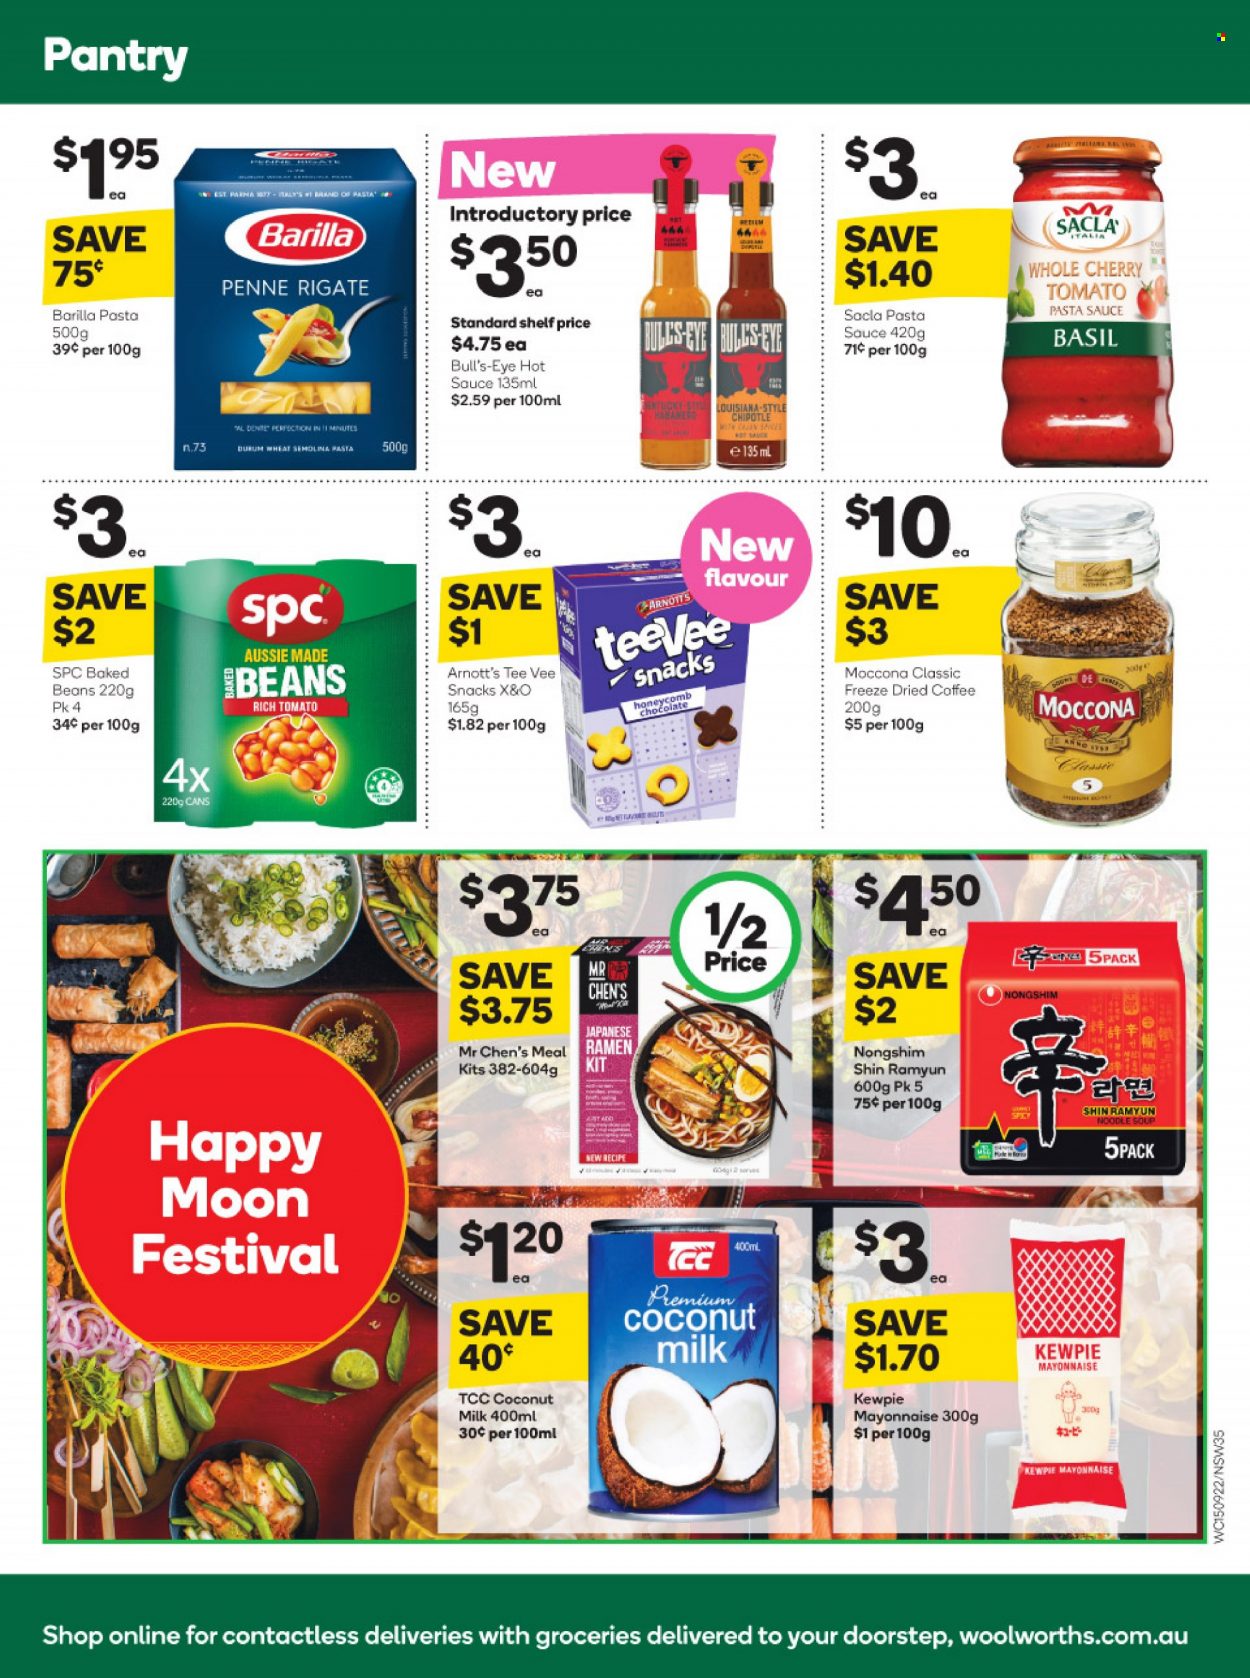 thumbnail - Woolworths Catalogue - 15 Sep 2021 - 21 Sep 2021 - Sales products - cherries, ramen, pasta sauce, soup, sauce, noodles cup, Barilla, noodles, mayonnaise, chocolate, snack, semolina, coconut milk, baked beans, penne, esponja, coffee, Moccona, Aussie. Page 35.